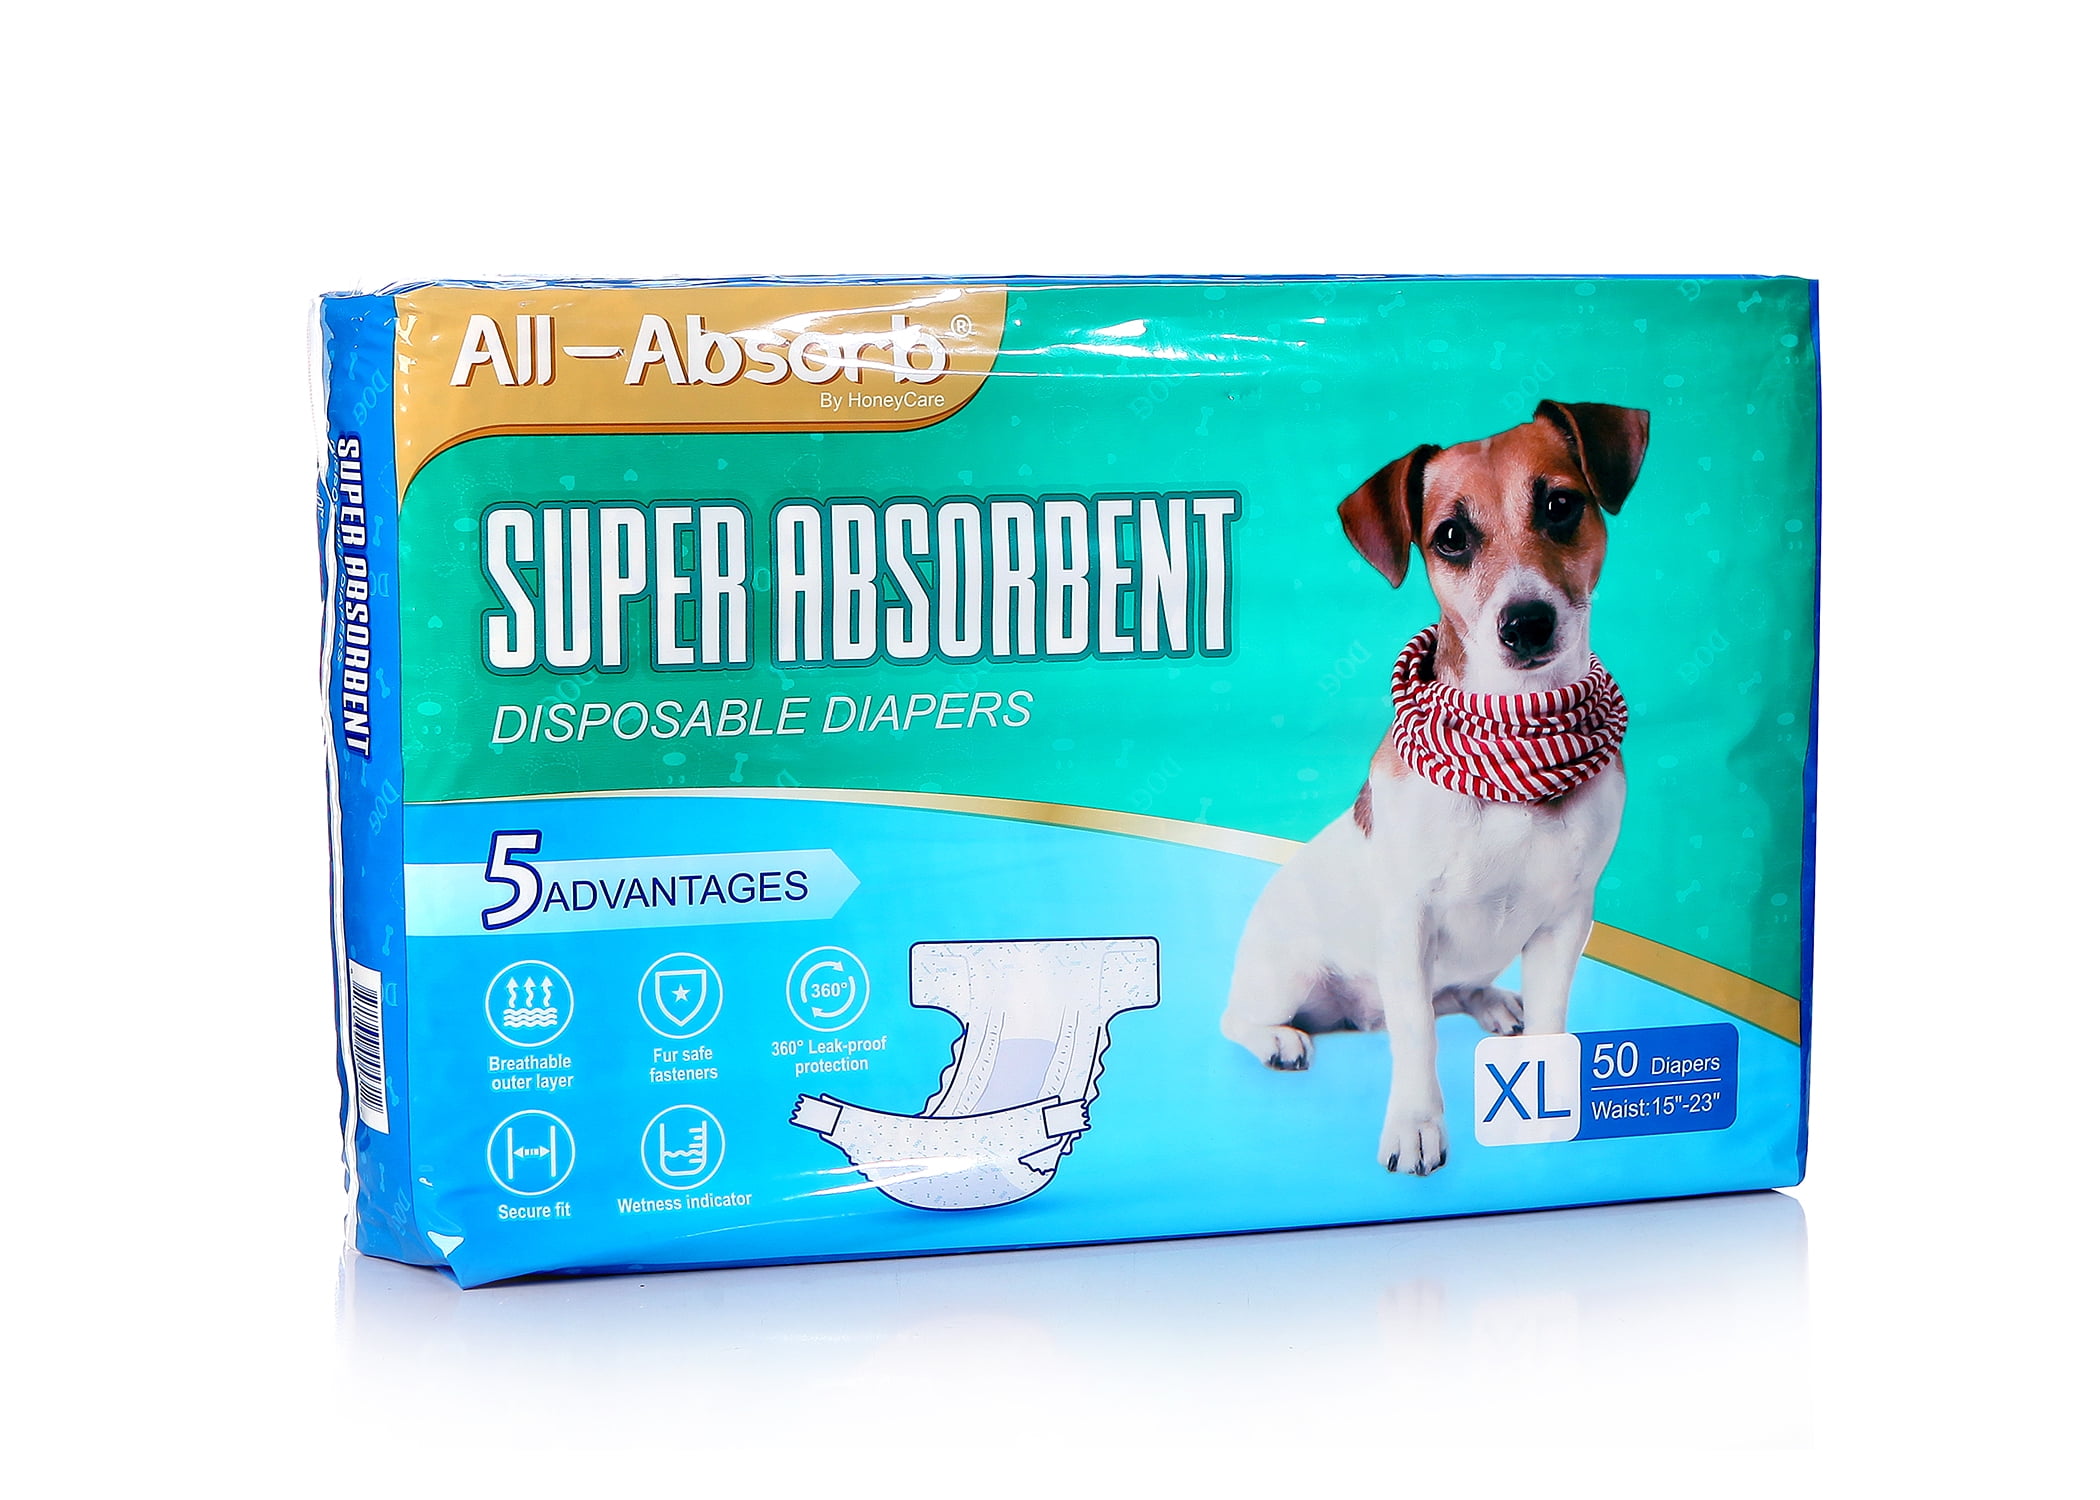 Details about   NEW10/30pcs Diapers For Dogs Pet Female Disposable Leakproof Nappies Puppy Pants 